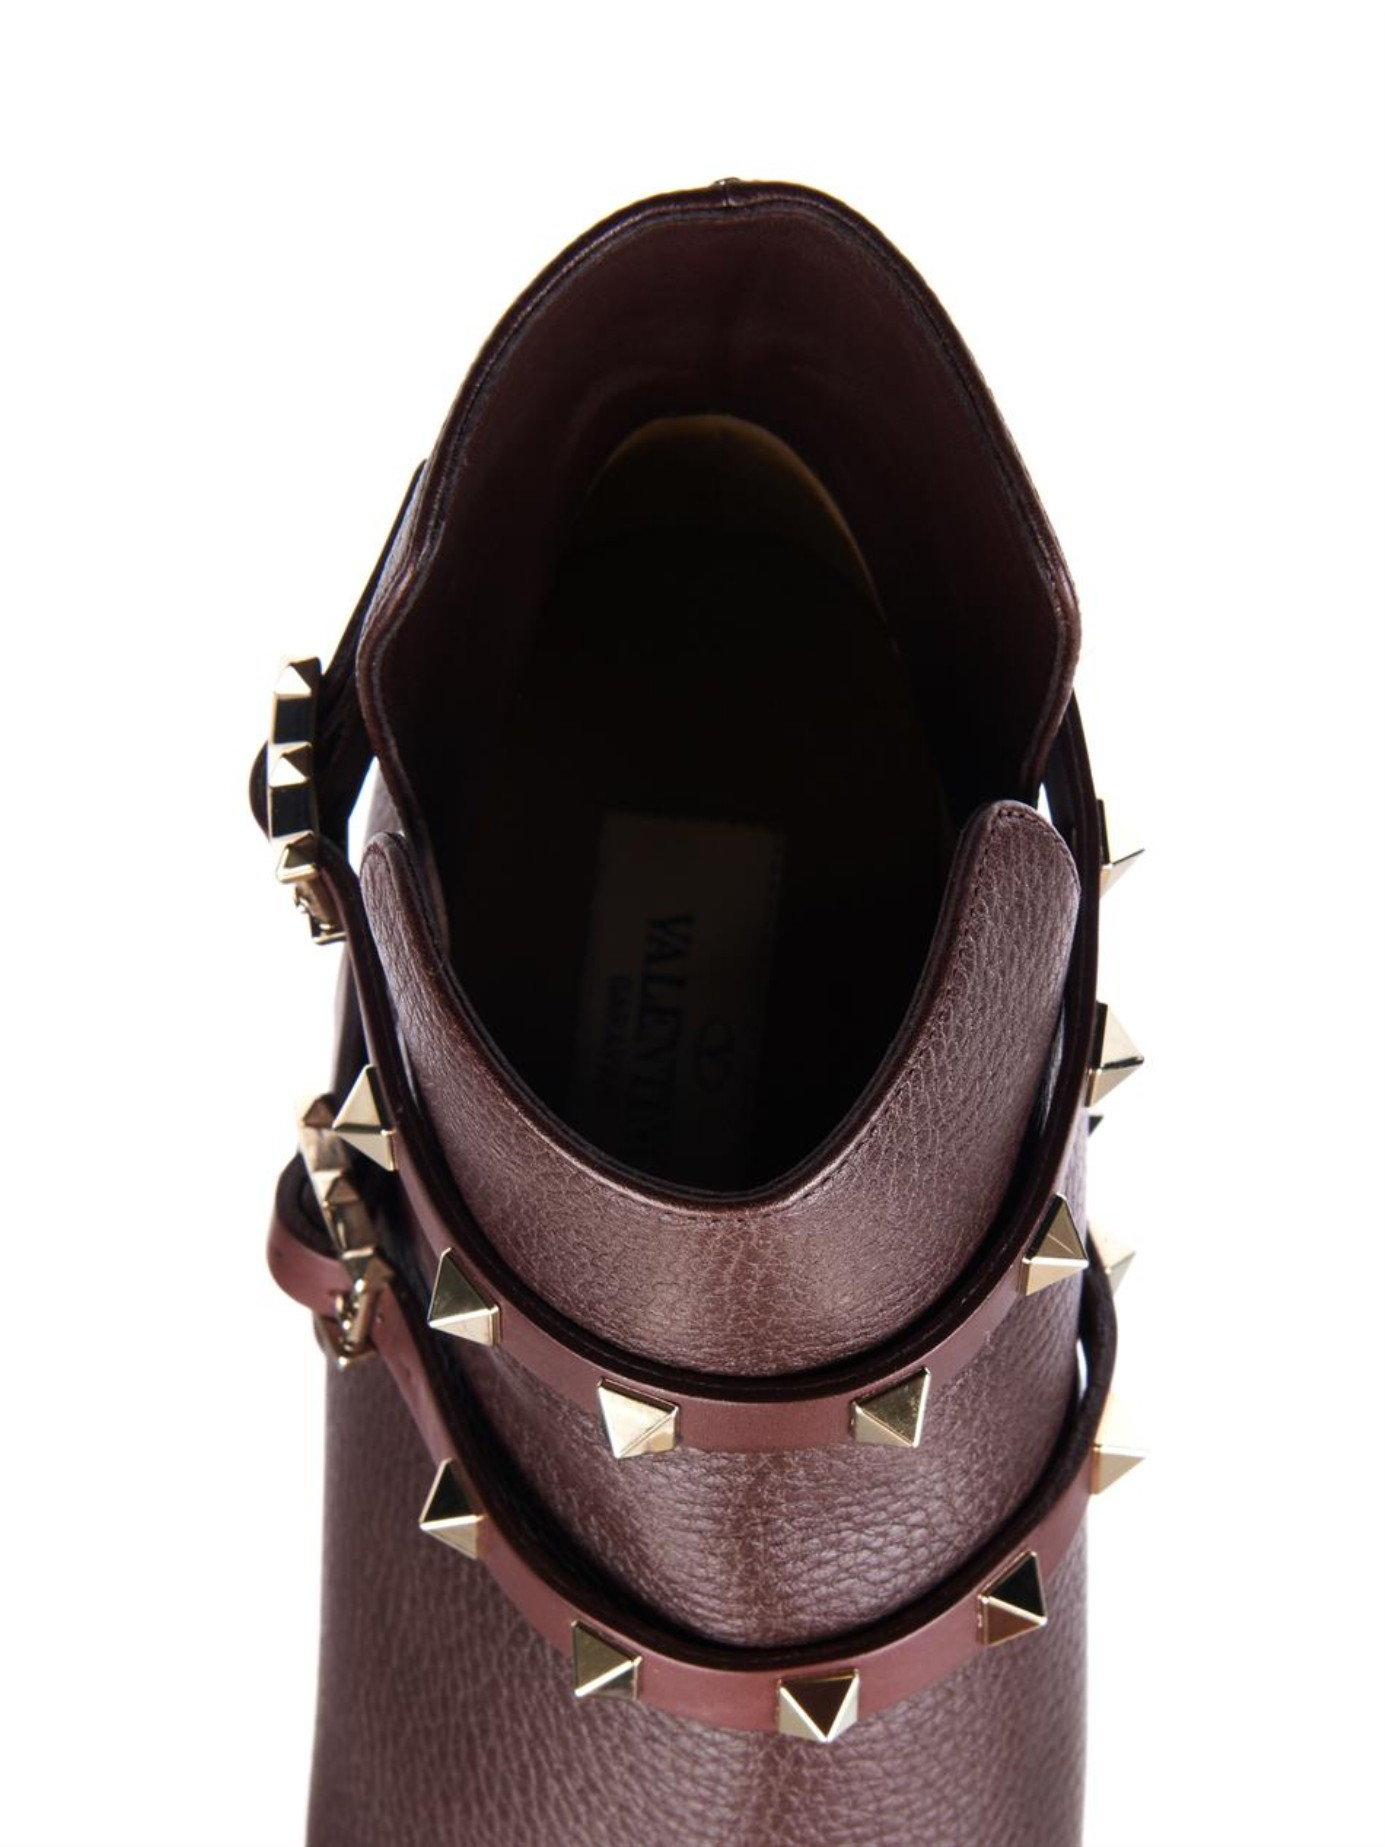 Lyst - Valentino Rockstud Harness Ankle Boot in Purple